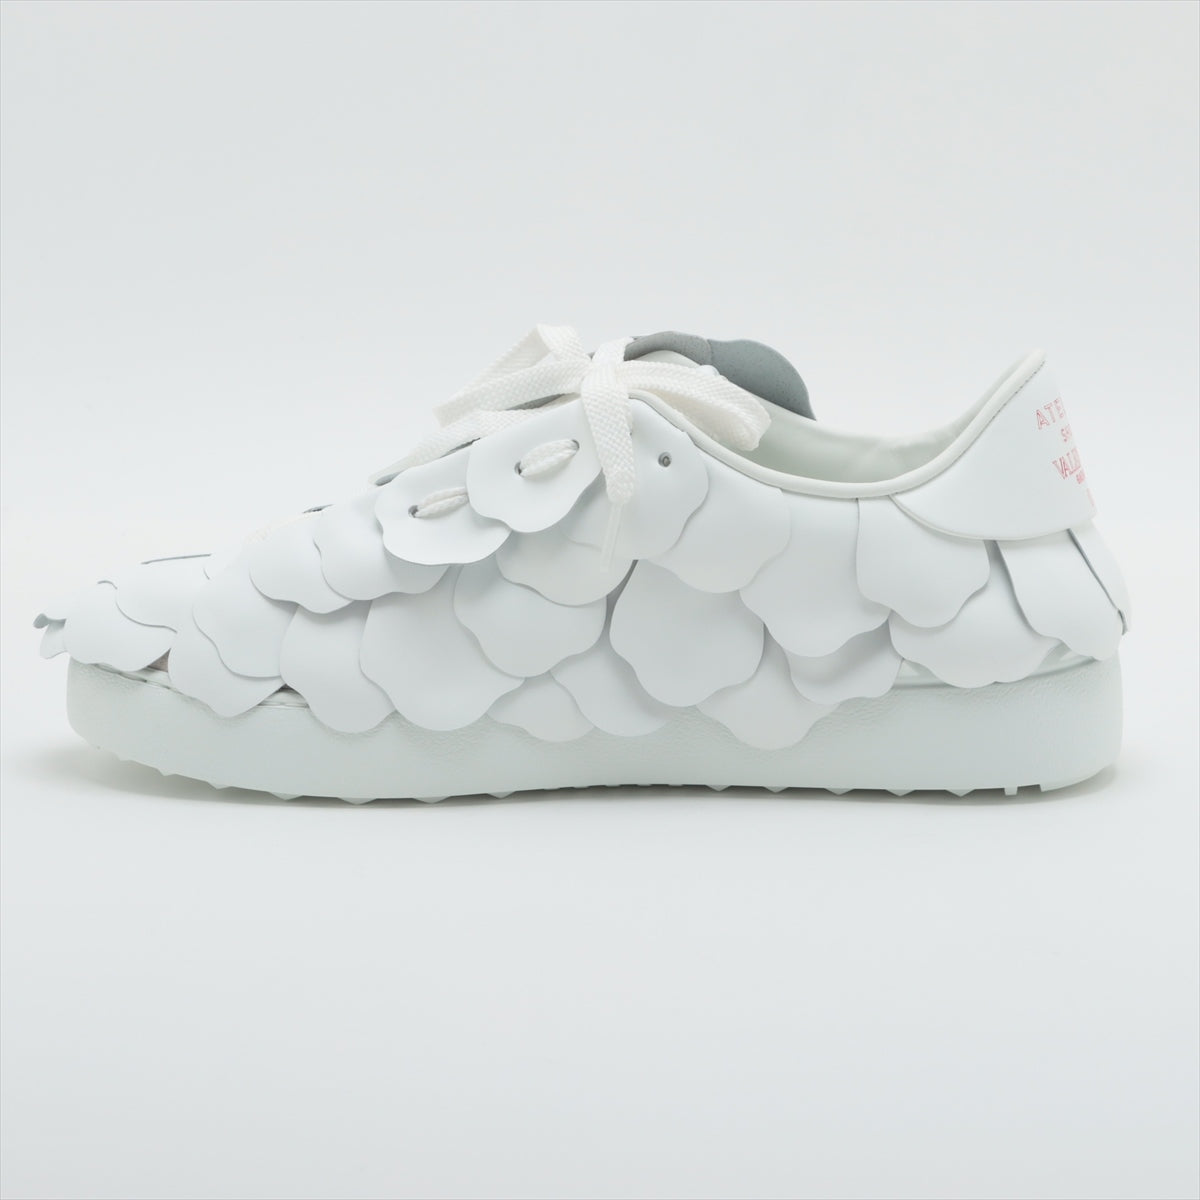 Valentino Garavani Leather Sneakers EU37 1/2 Ladies' White Atelier Rose edition box There is a bag